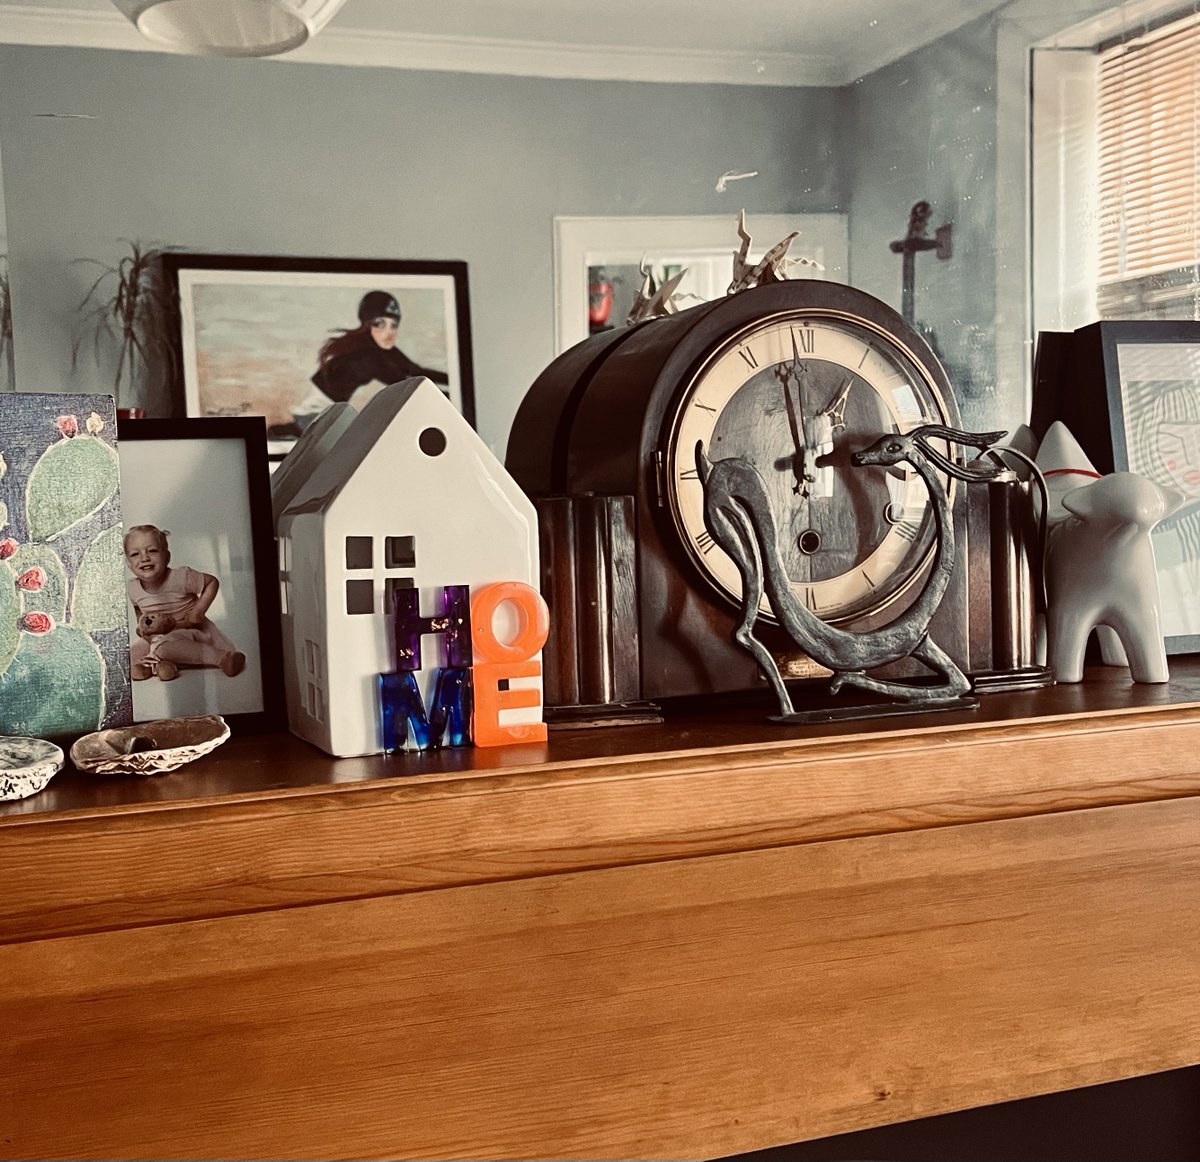 Tomorrow I release a new single 'Home'🎶 My coverart is a carefully curated mantelpiece with items to remind me of beloved people & places 📷 Here's a snippet 👀 Hear the track first on @Bandcamp for #BandcampFriday 💚 & all the other places Saturday ✨🎧 Links in bio 🔗